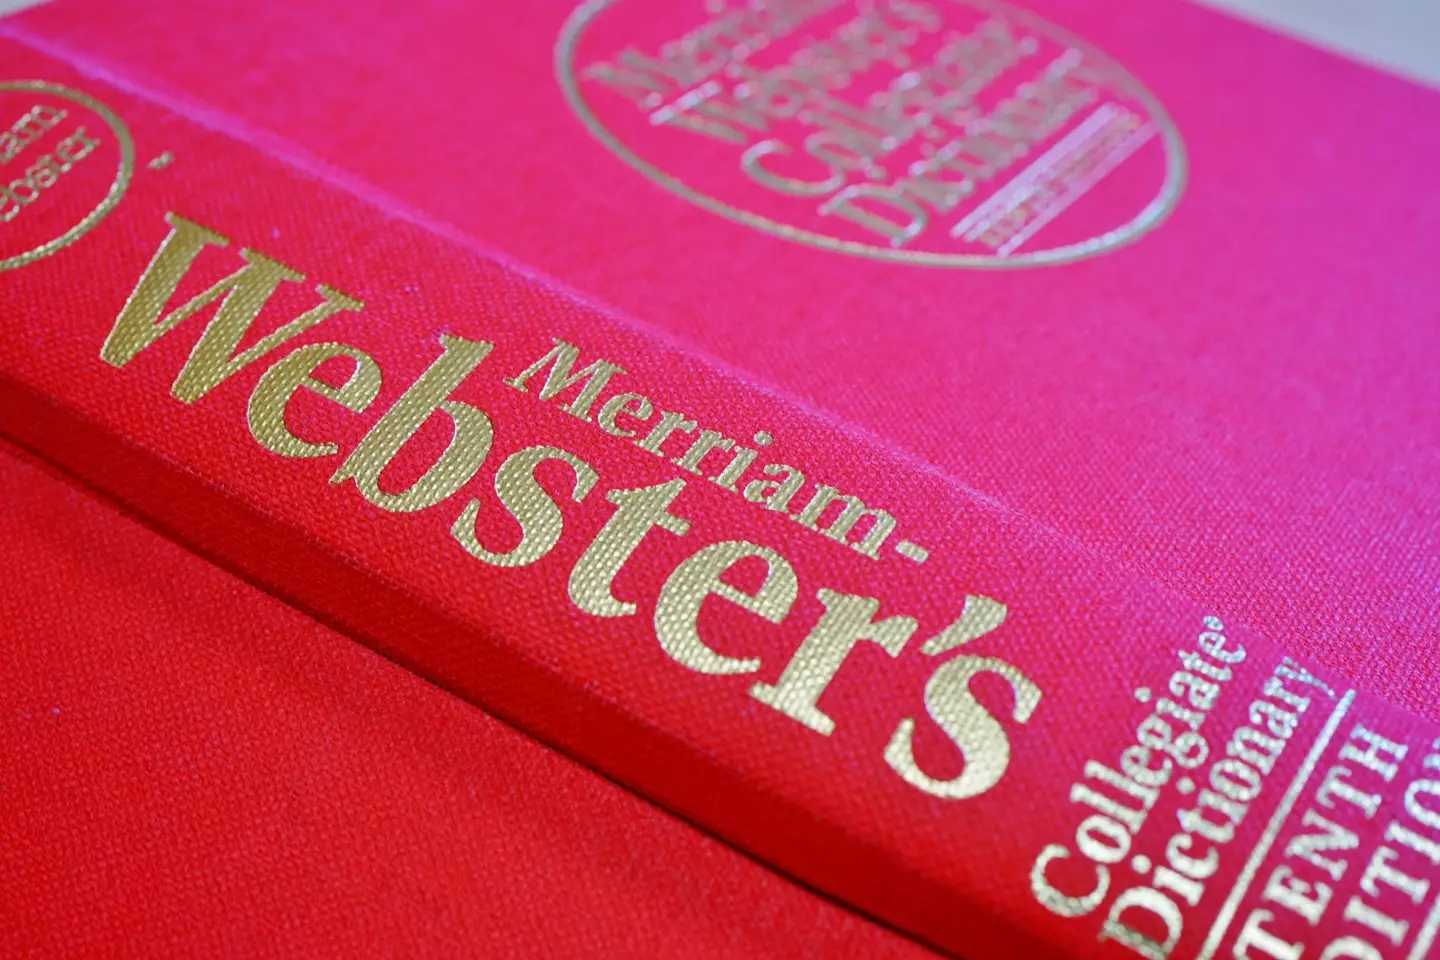 Merriam-Webster closed its headquarters following the threats.